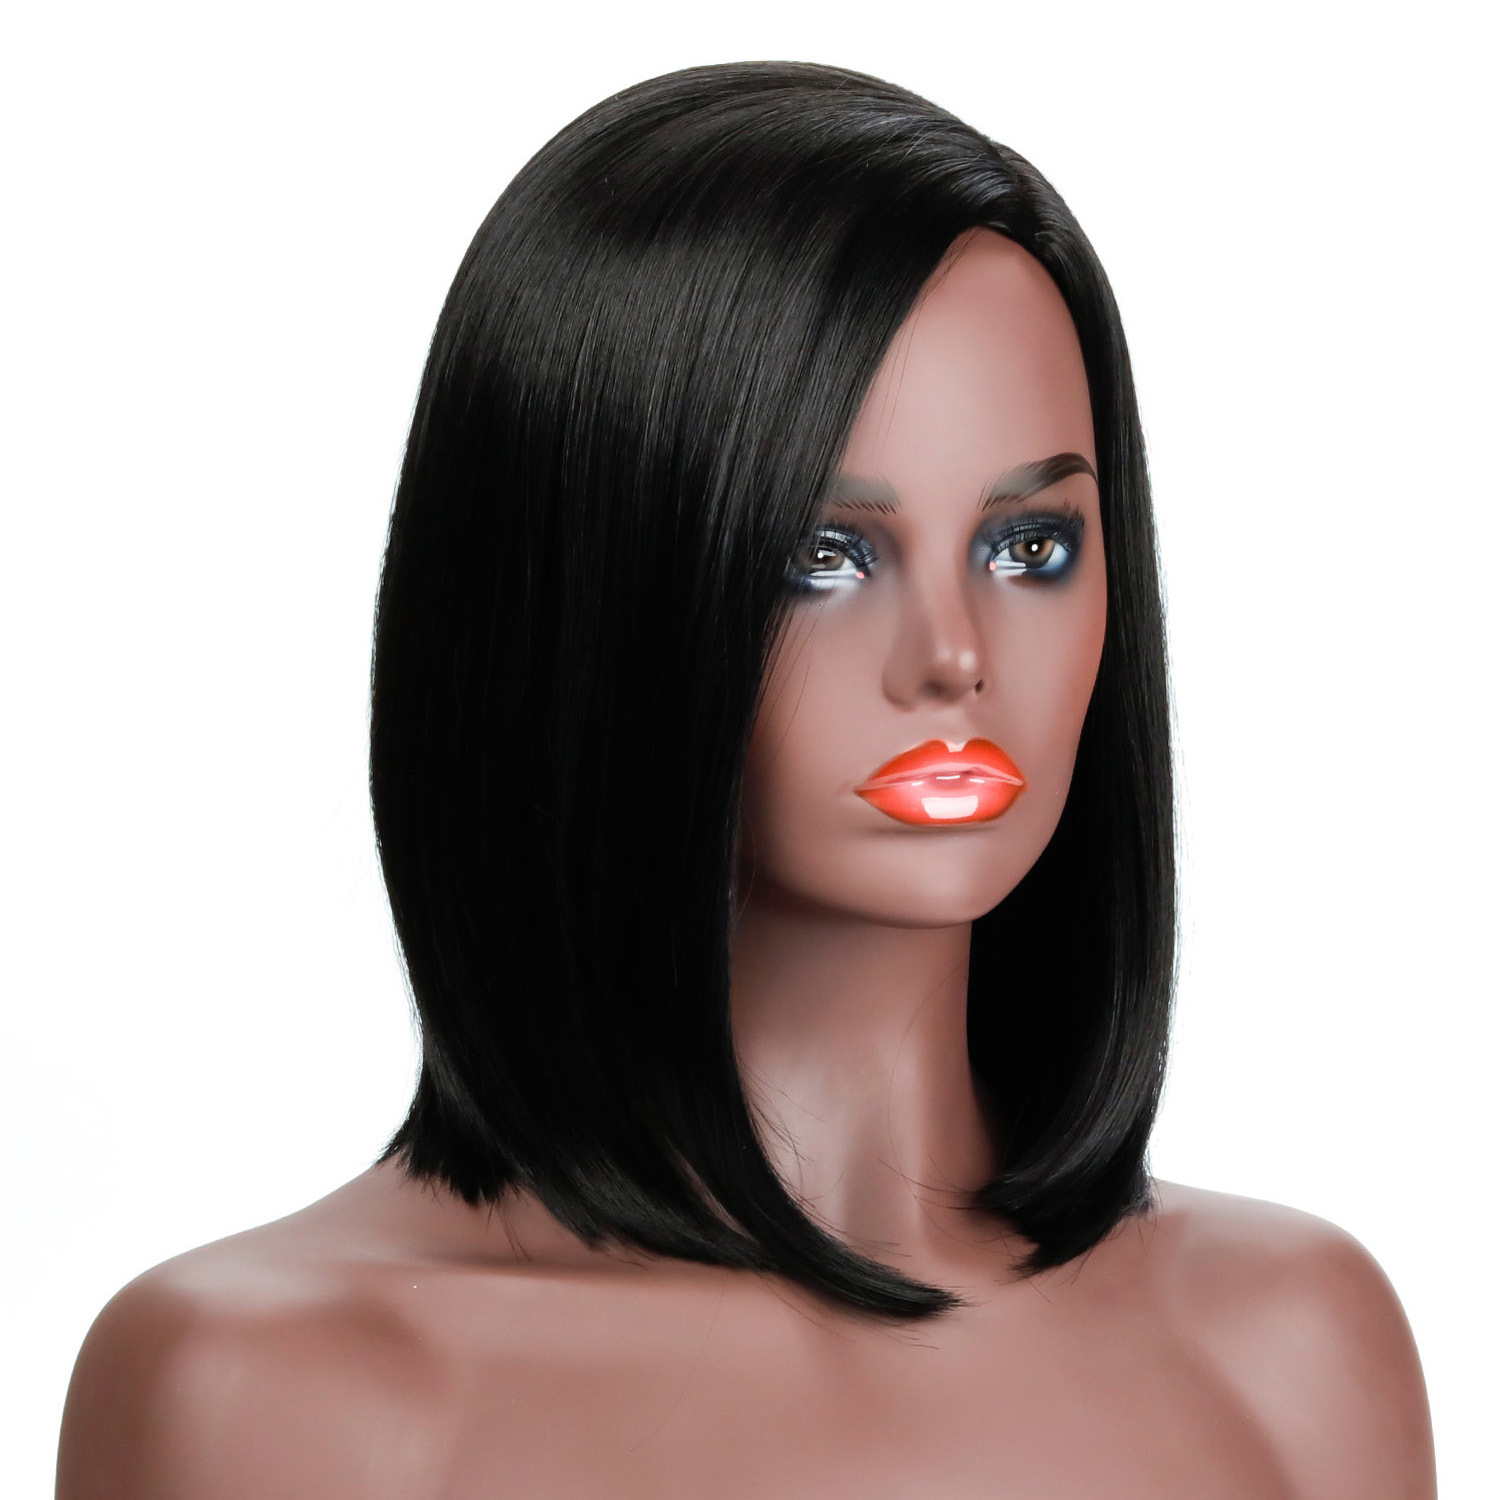 A synthetic wig with black straight hair of medium length, tailored for women's fashion and style